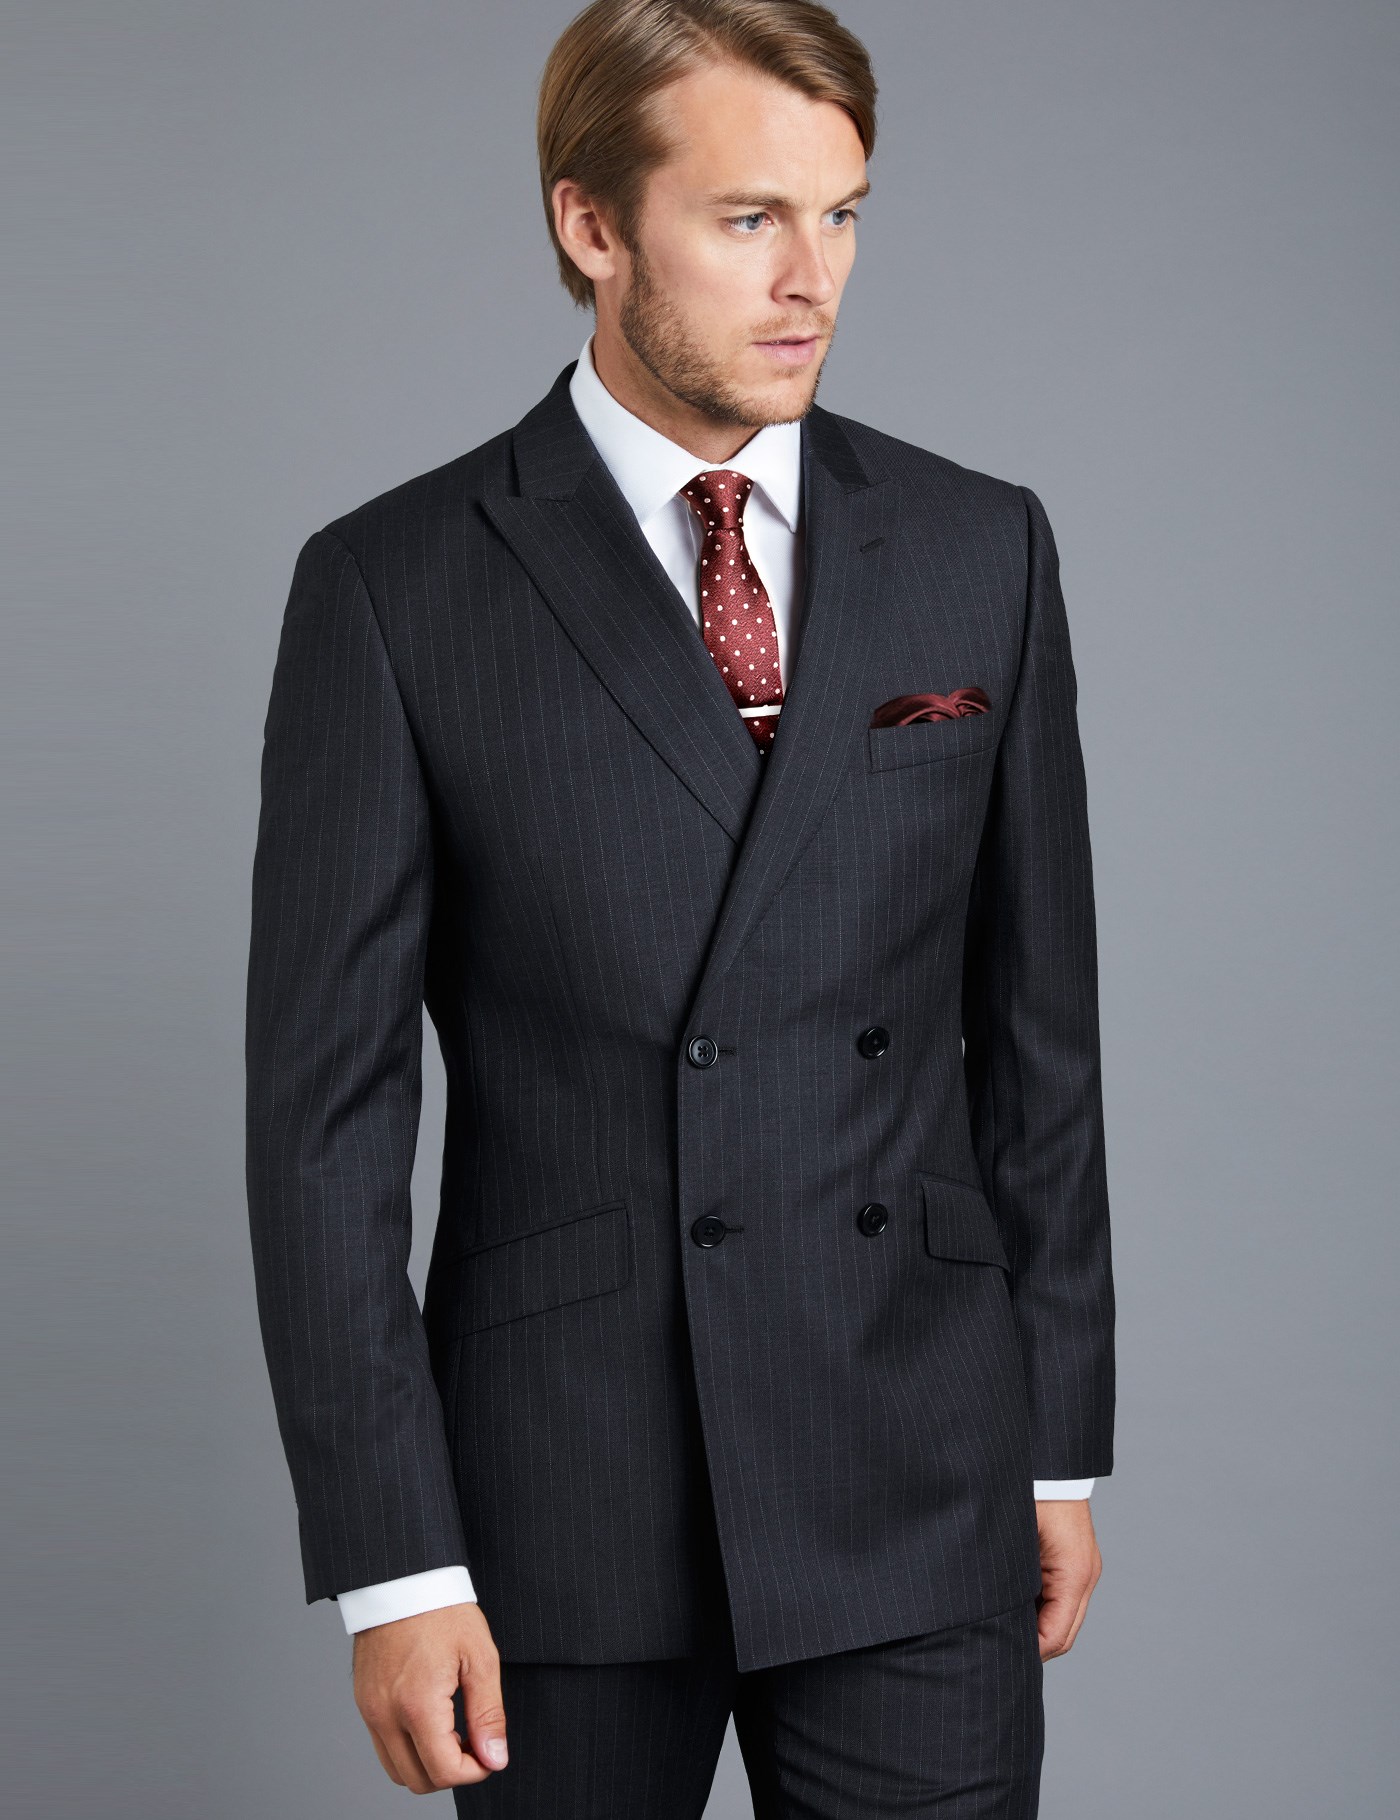 Men S Charcoal Grey Pinstripe Slim Fit Suit Double Breasted Super 120s Wool Hawes And Curtis